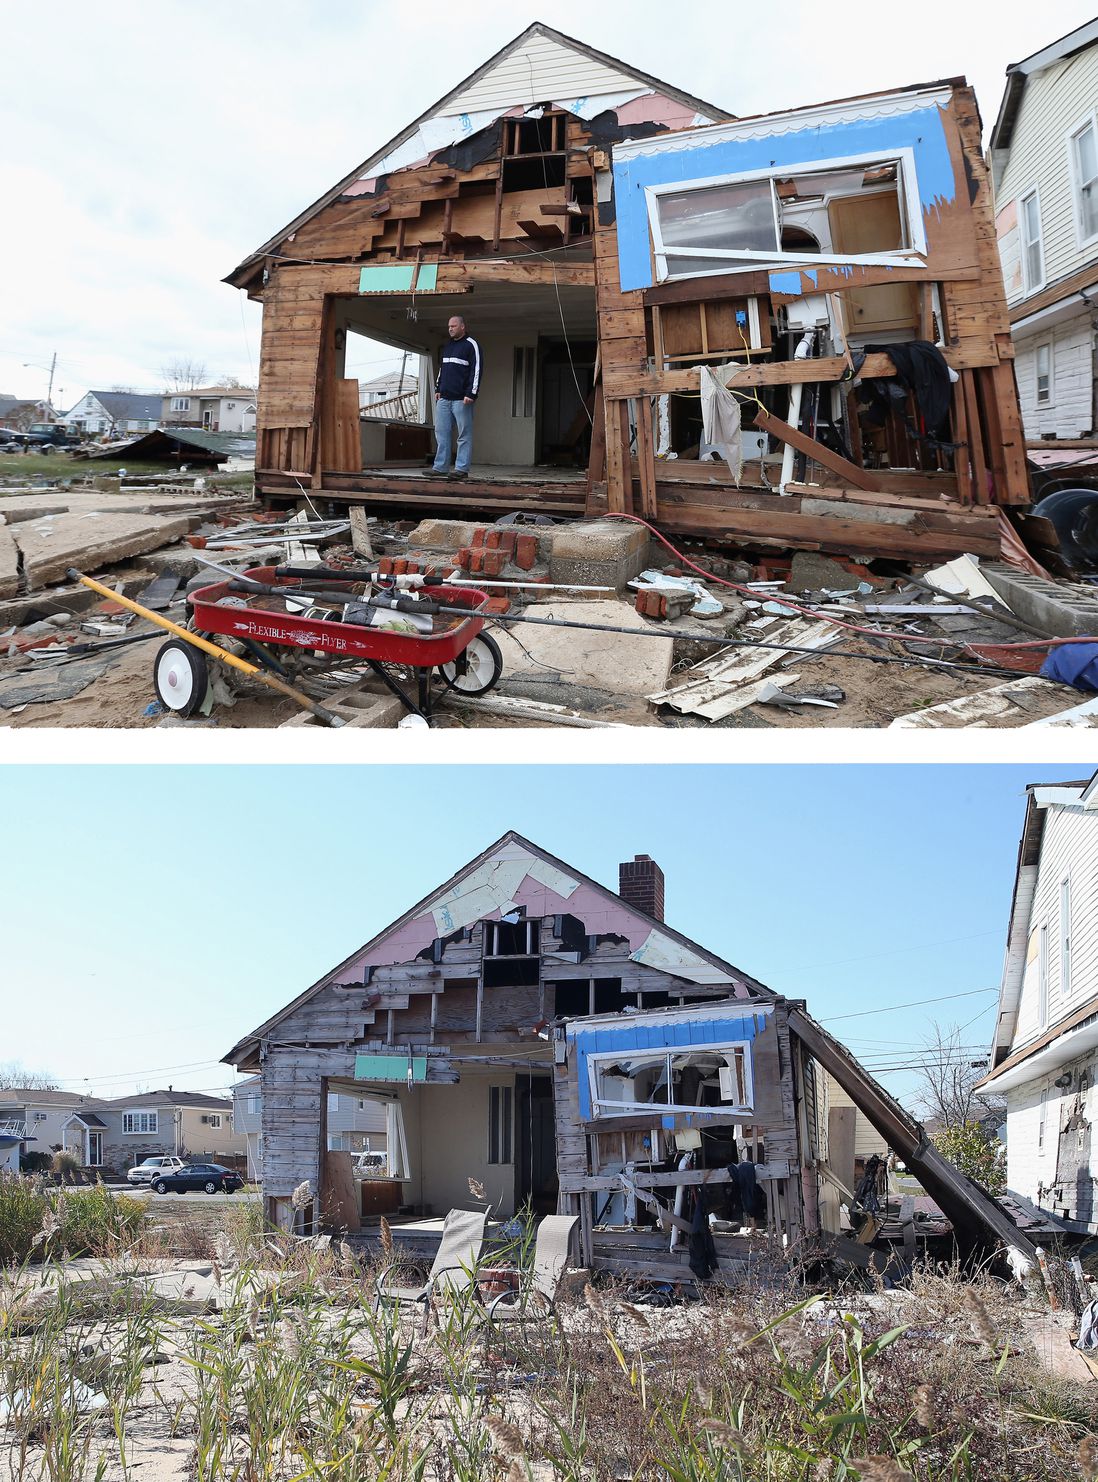 [Top] Gary Silberman surveys his home that was destroyed by Hurricane Sandy on October 31, 2012 in Lindenhurst, New York, United States. [Bottom] A home on Venetian Boulevard sits still damaged by Superstorm Sandy on October 22, 2013 in Lindenhurst, New York.